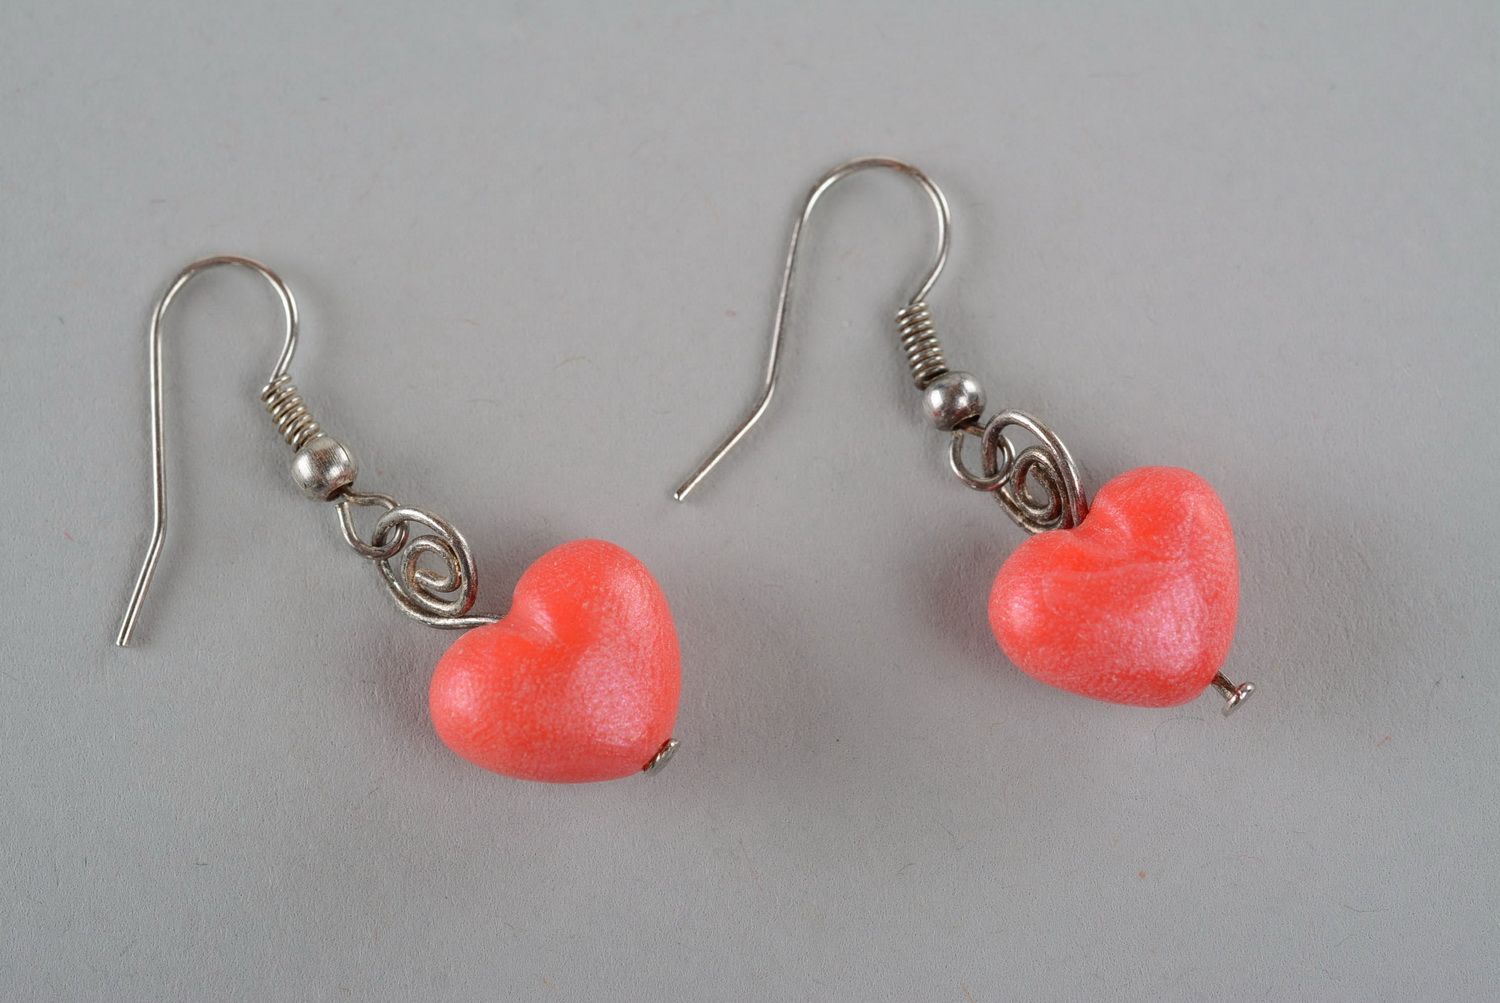 Earrings with charms made of polymer clay photo 2